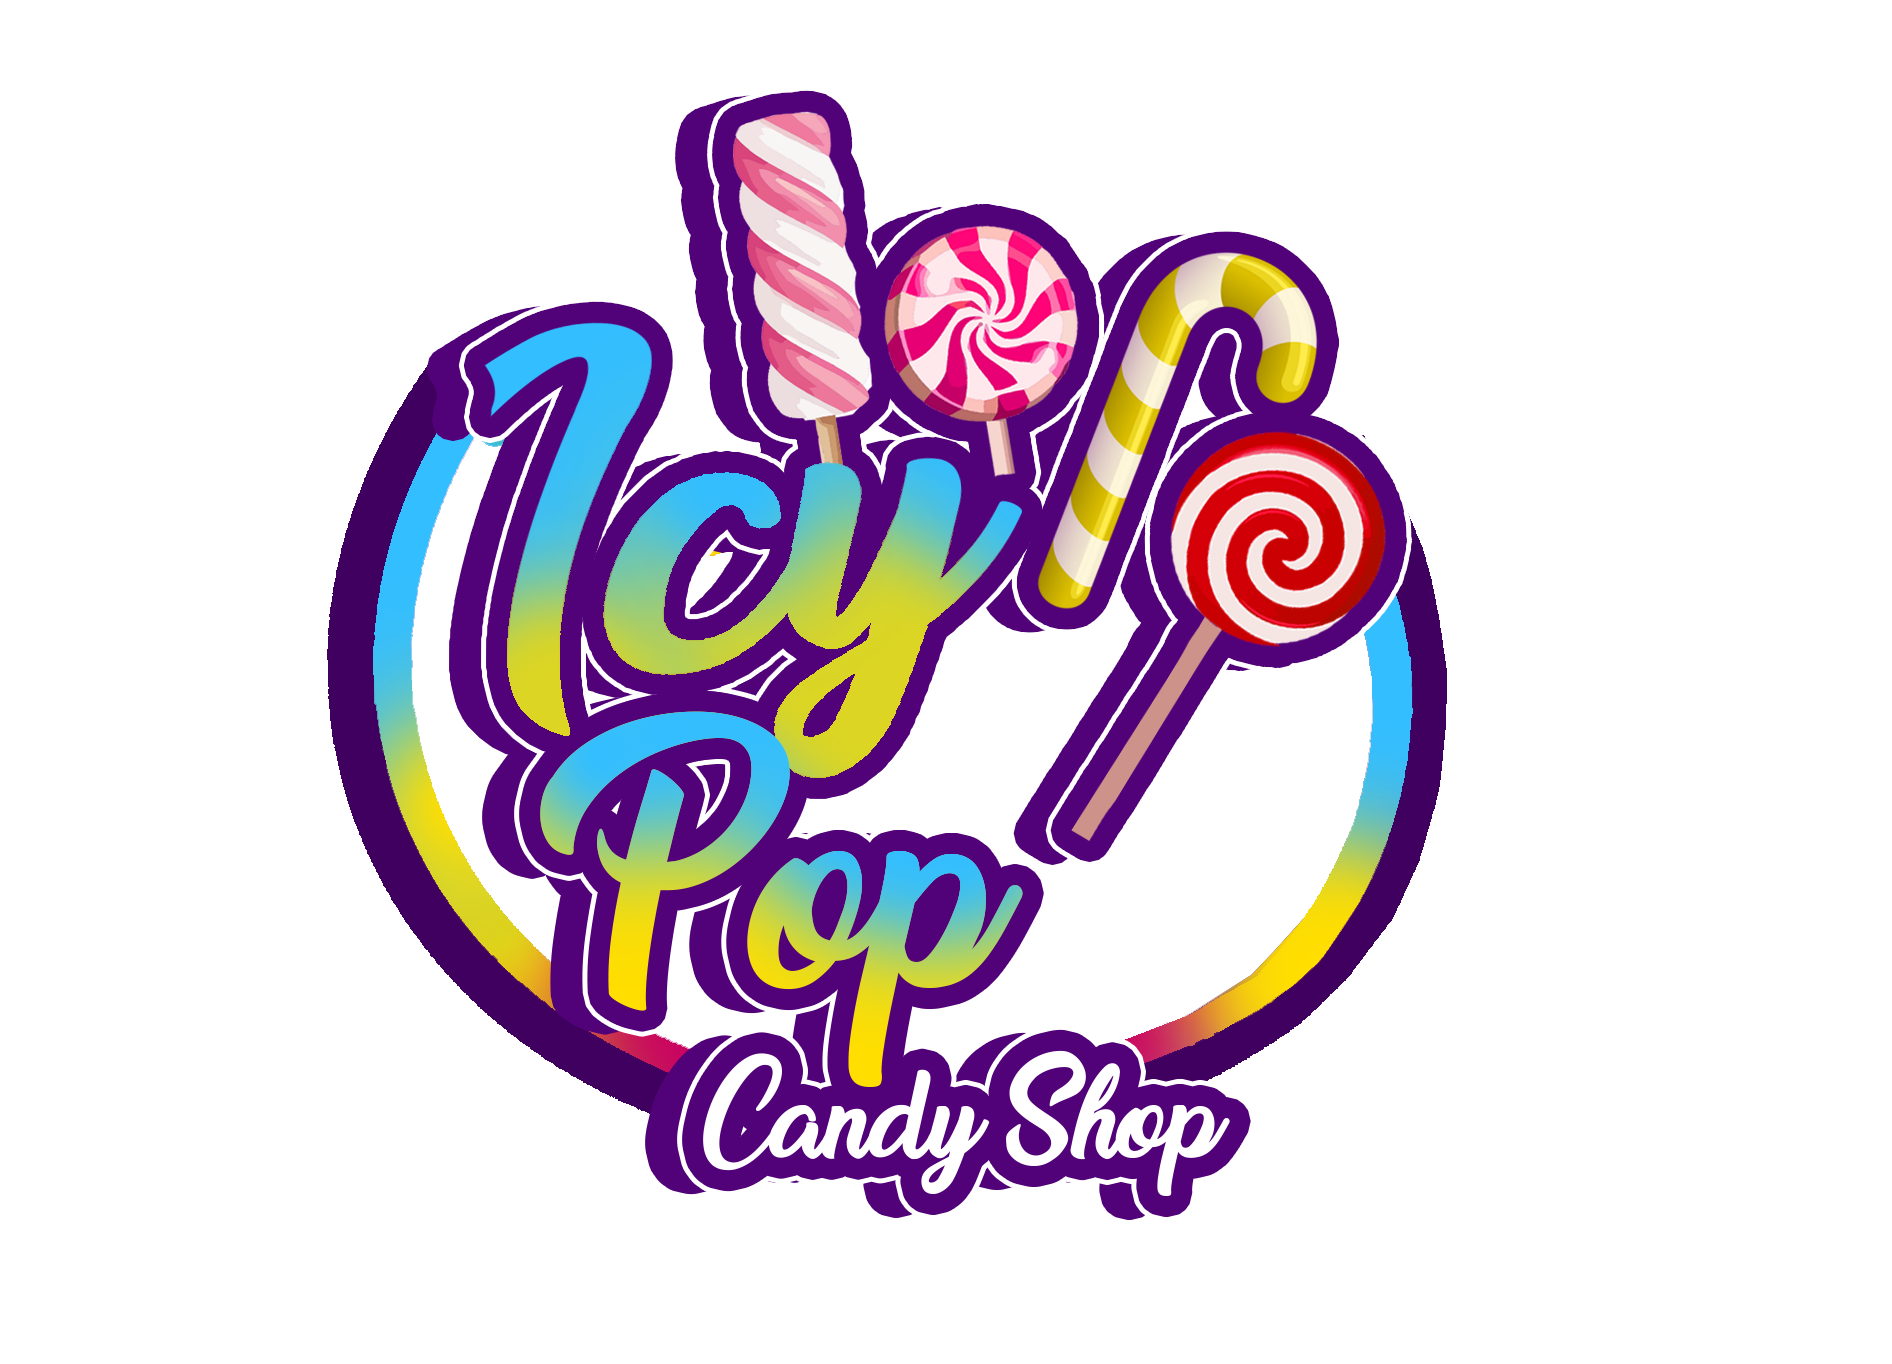 Icy Pop Candy Shop